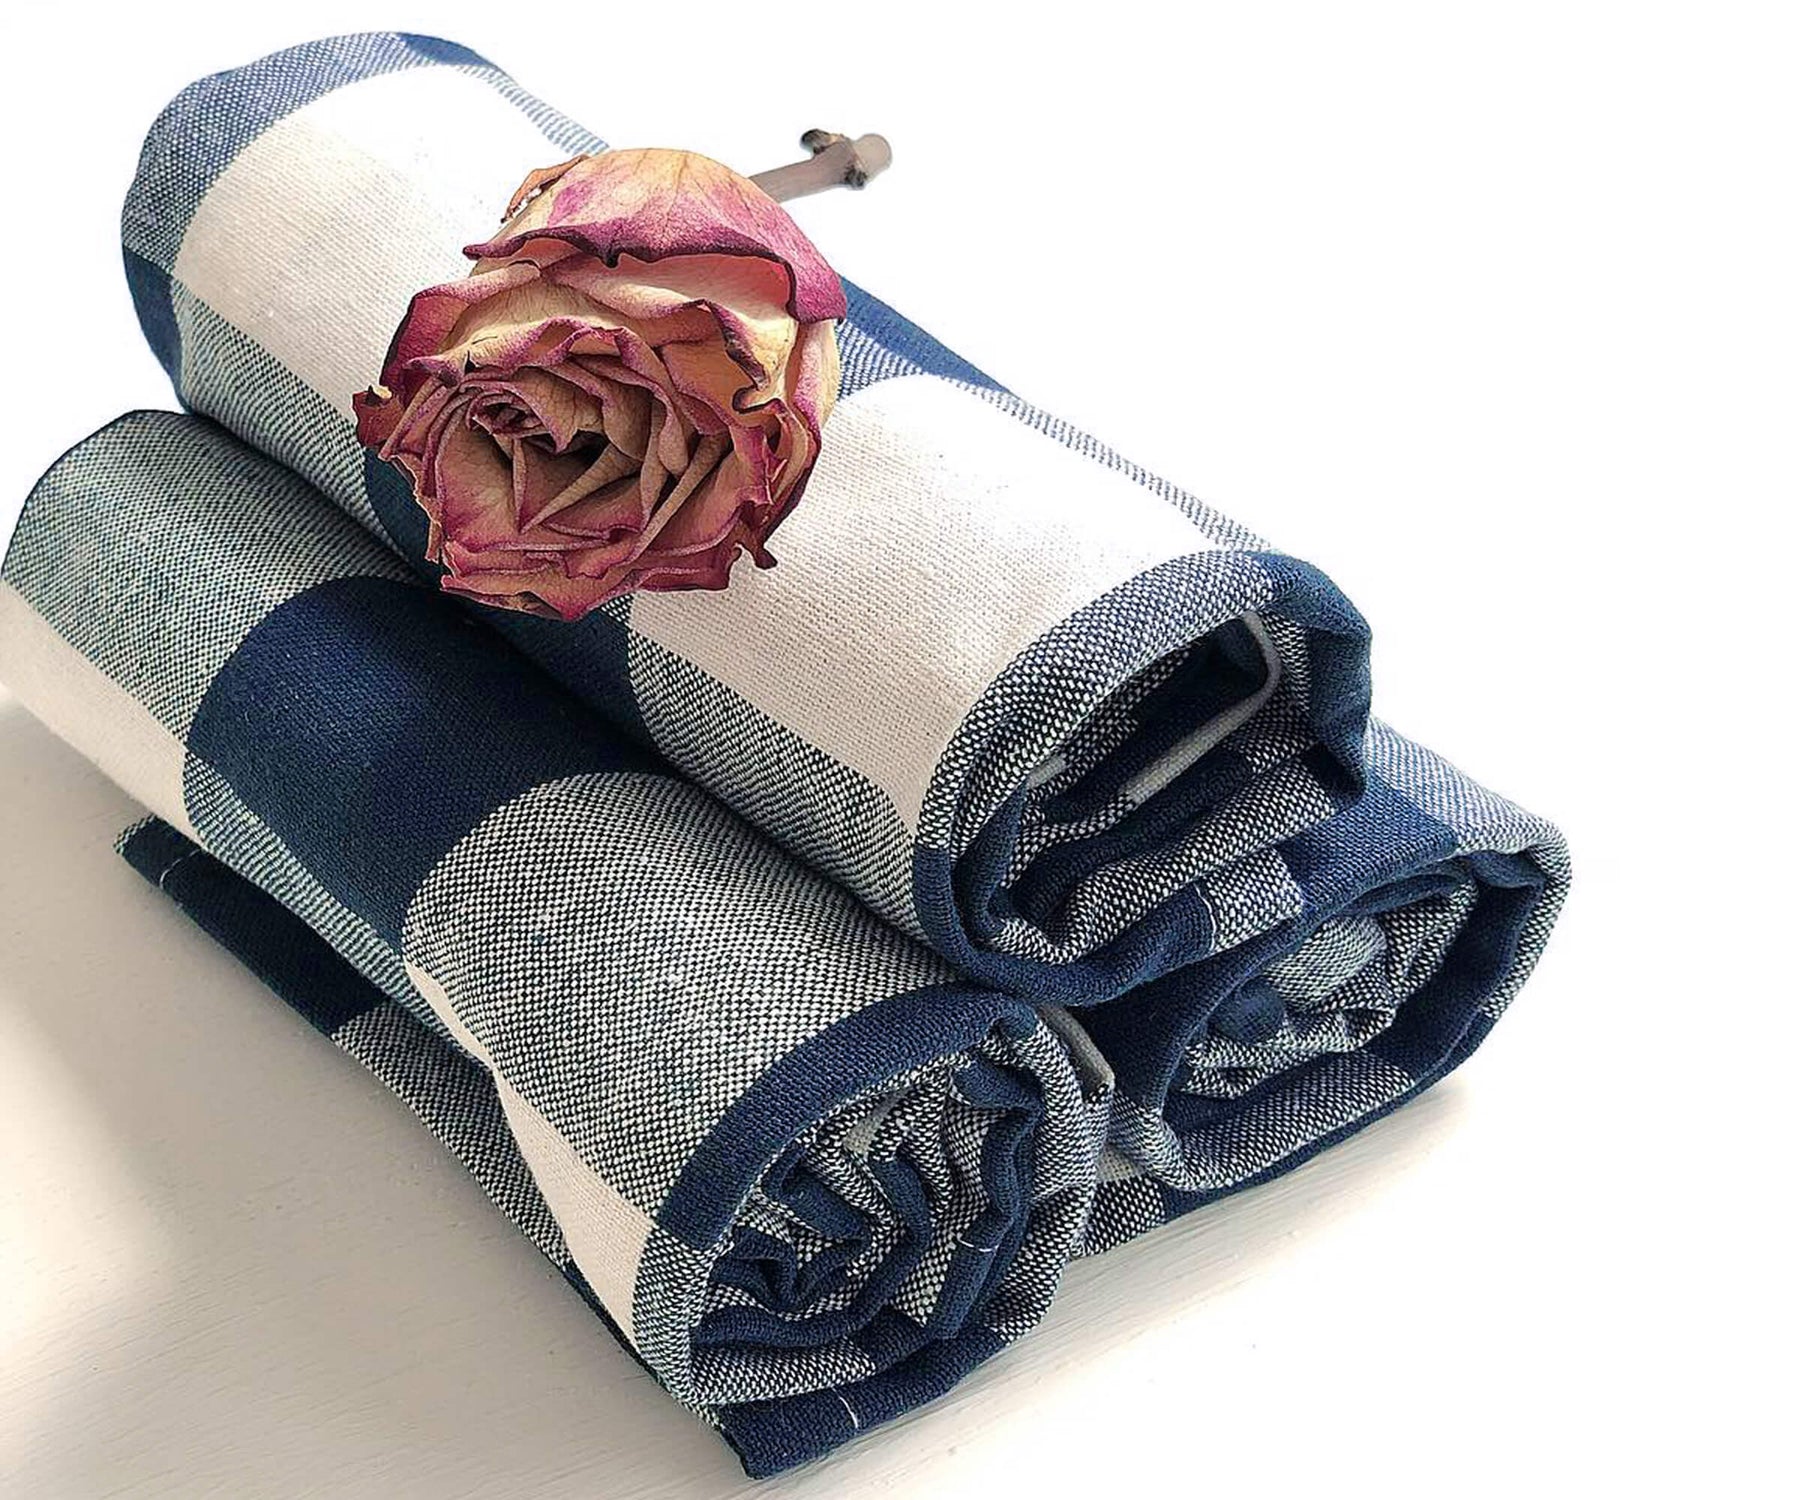 Kitchen towels are typically made from cotton, which is a durable and absorbent fabric. They are also machine-washable and easy to care for.